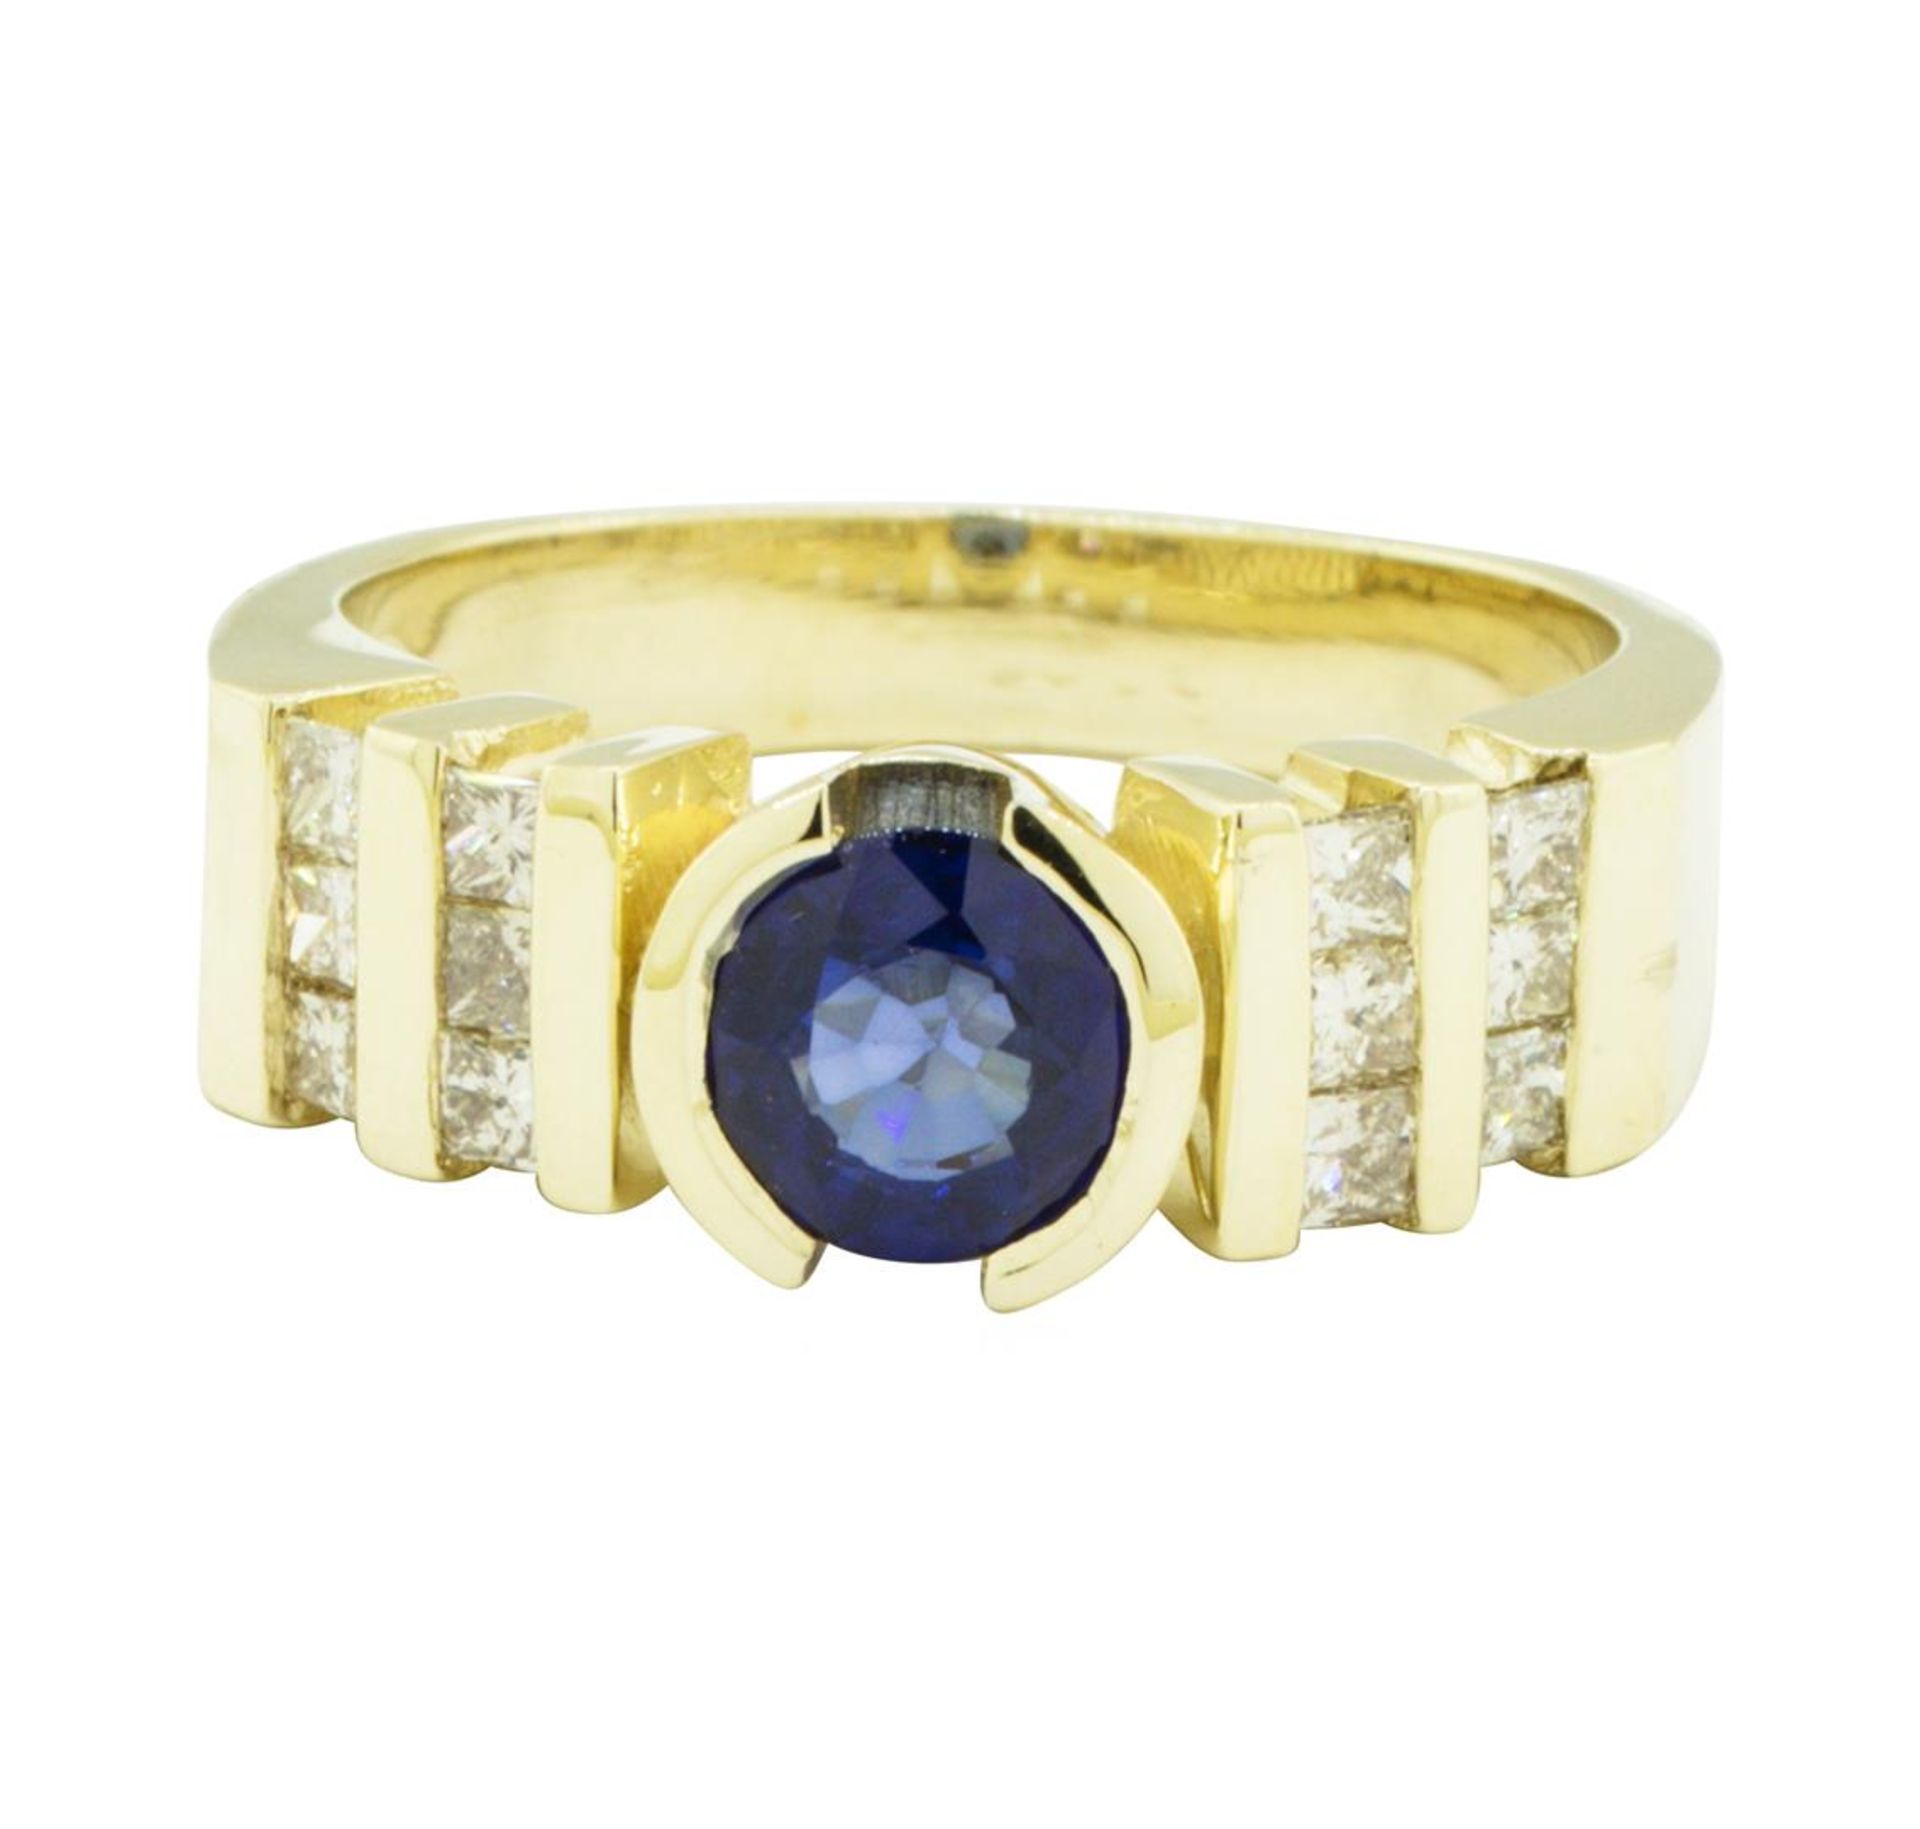 1.45 ctw Blue Sapphire and Diamond Ring - 14KT Yellow Gold - Image 2 of 4